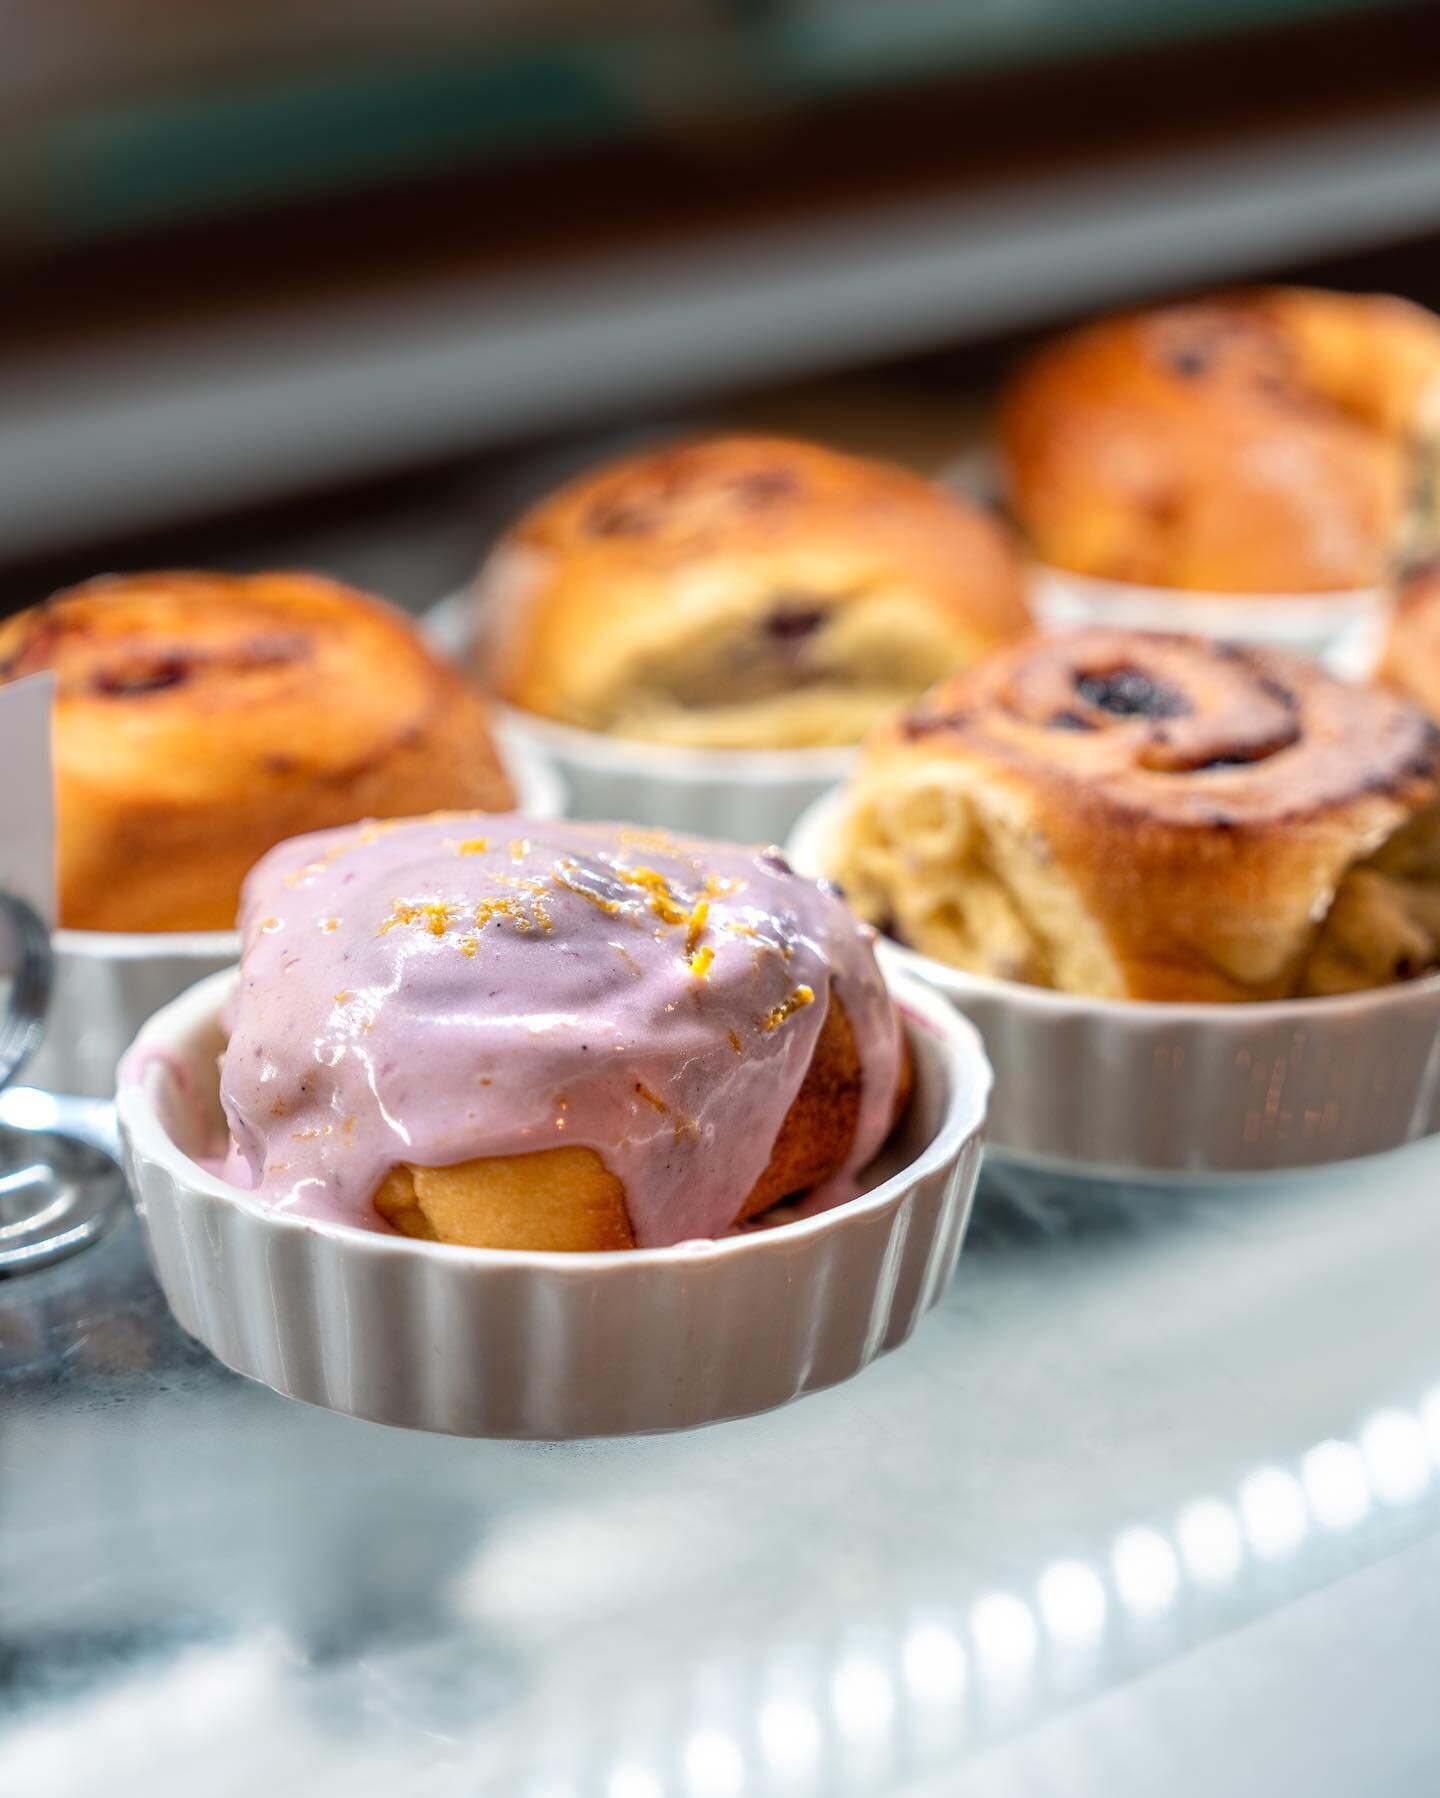 Our weekend cases always have something special! Stop by today to get yourself a seasonal Blueberry Roll. Fluffy and full of summer flavor, trust us, you won&rsquo;t want to miss it. 

Pictured: Blueberry Roll
A brioche roll with a sweet blueberry fi